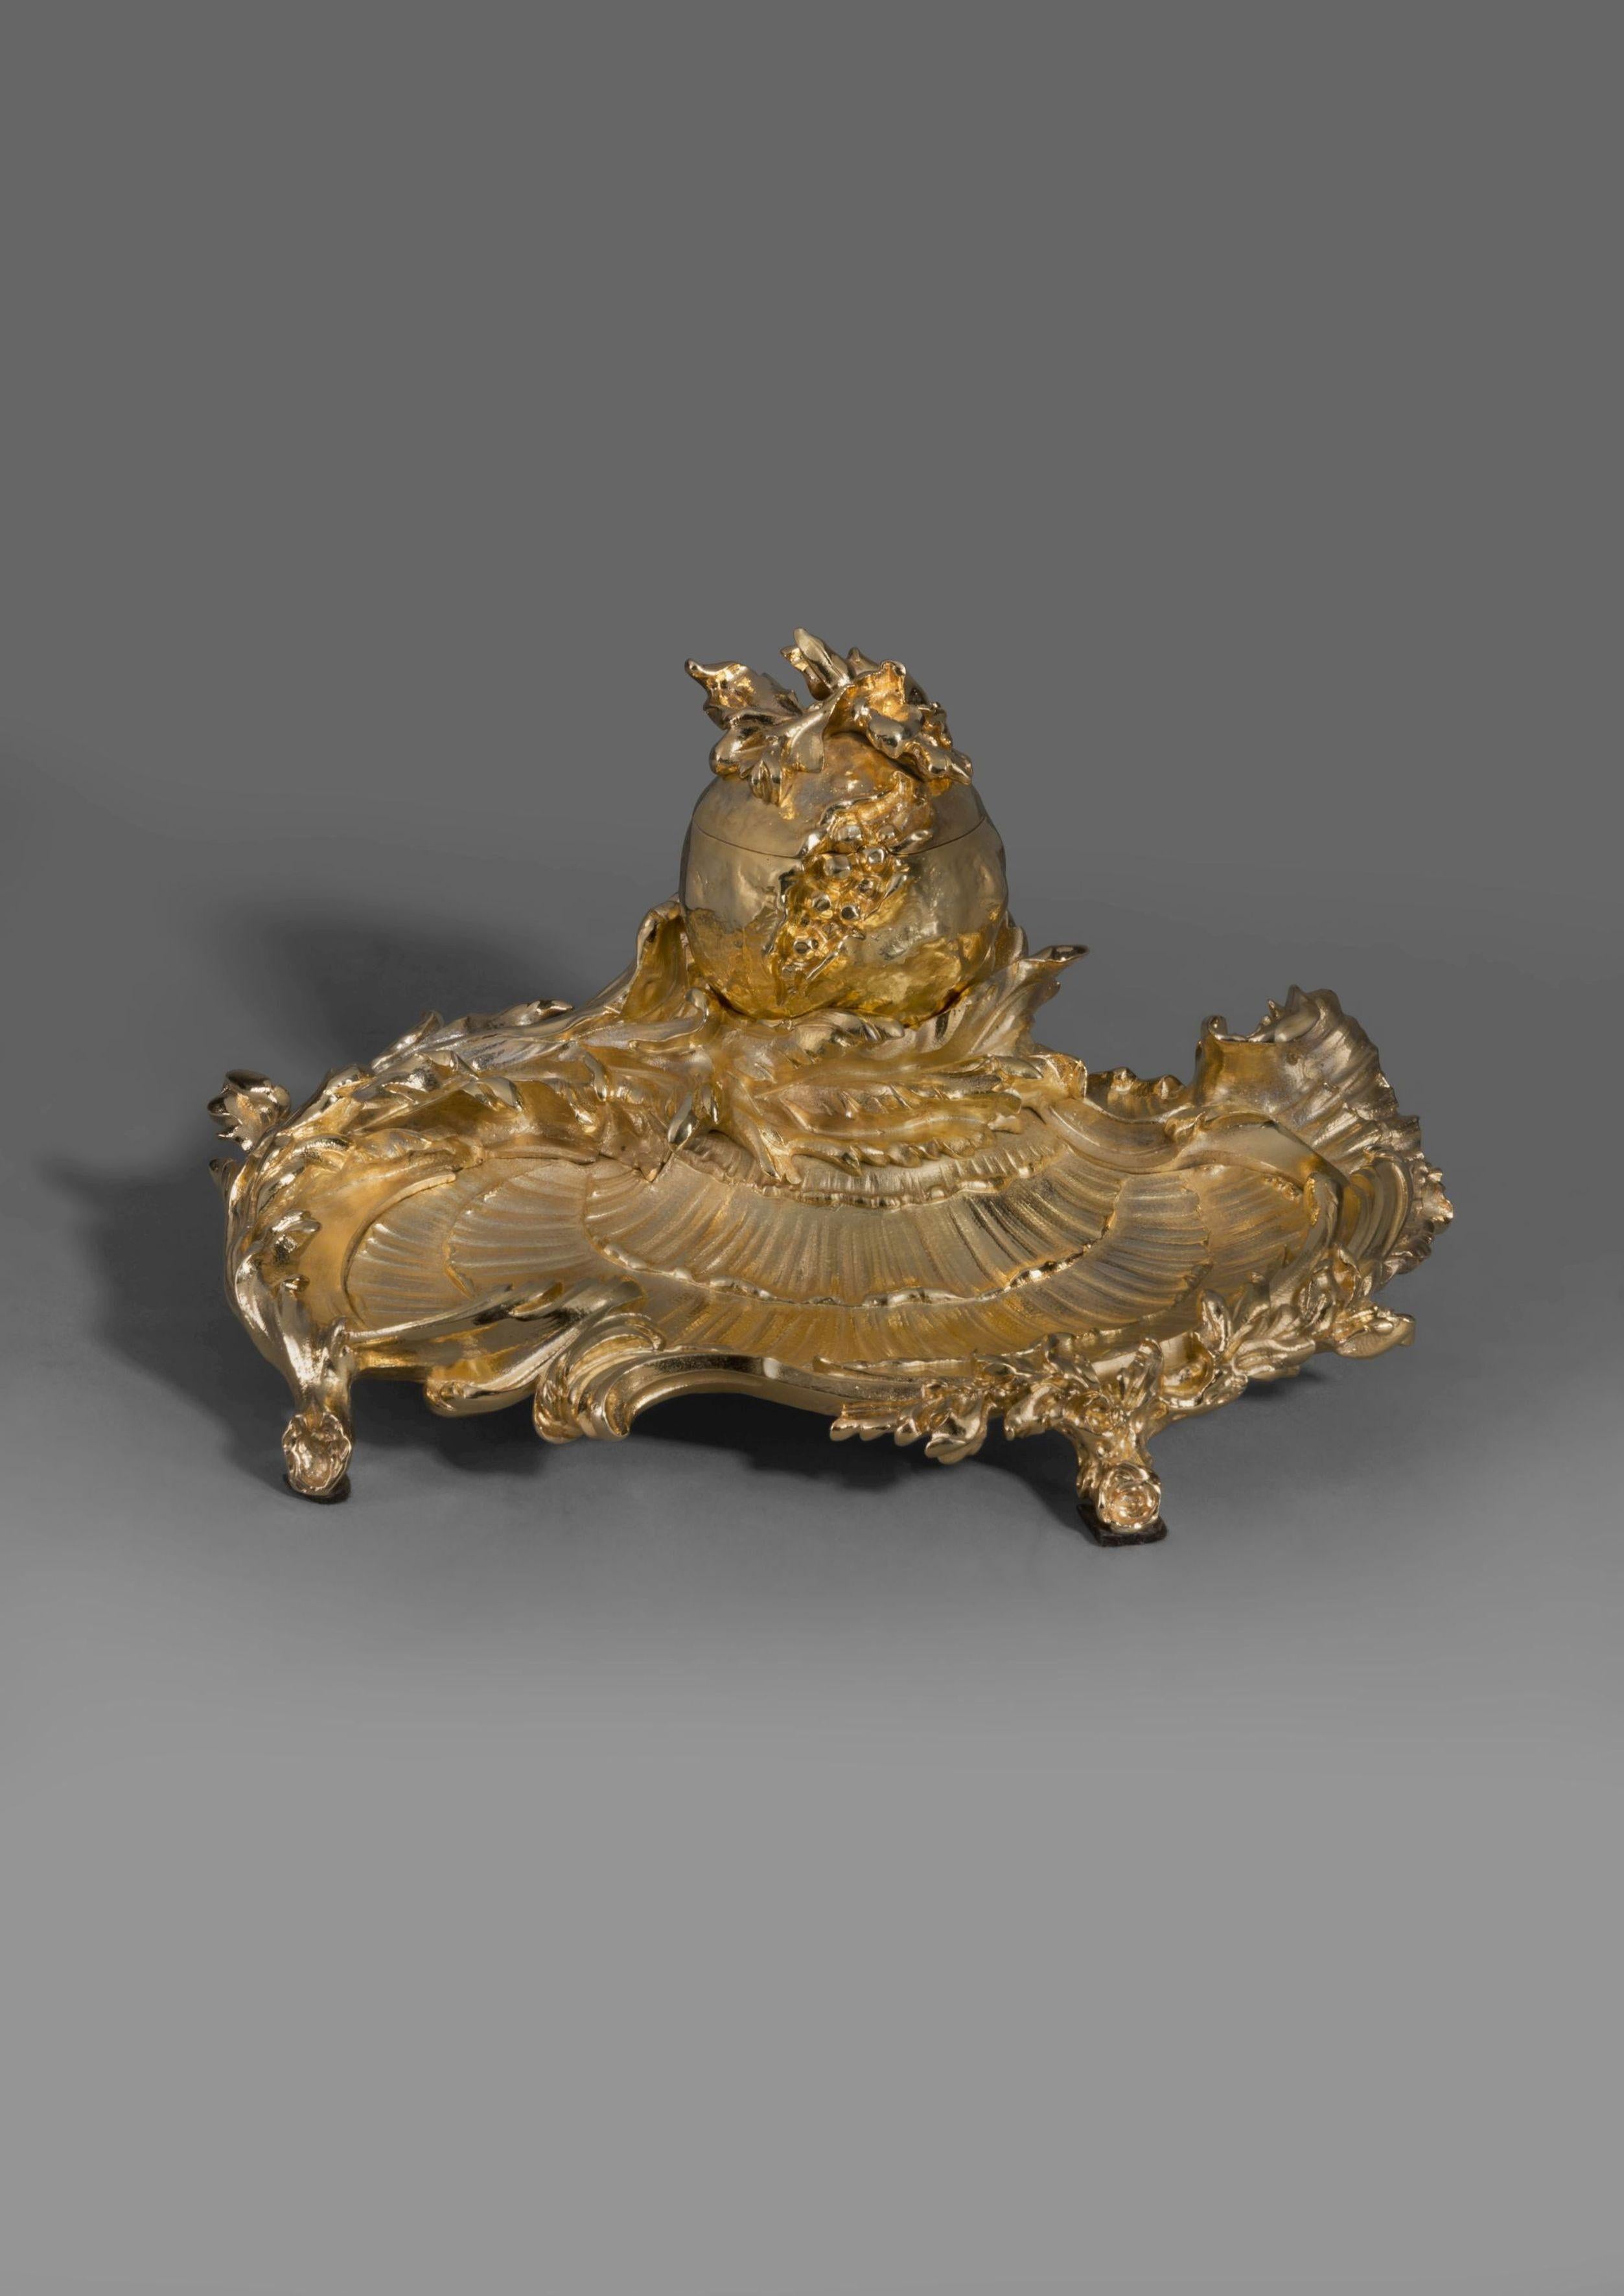 A Rare Louis XV Style gilt bronze Encrier, By Paul Sormani. 

French, circa 1870. 

Signed 'P. Sormani, Paris' to the underside of the cover. 

This finely cast and chased gilt bronze encrier is of rocaille form with scrolling leaves and branches